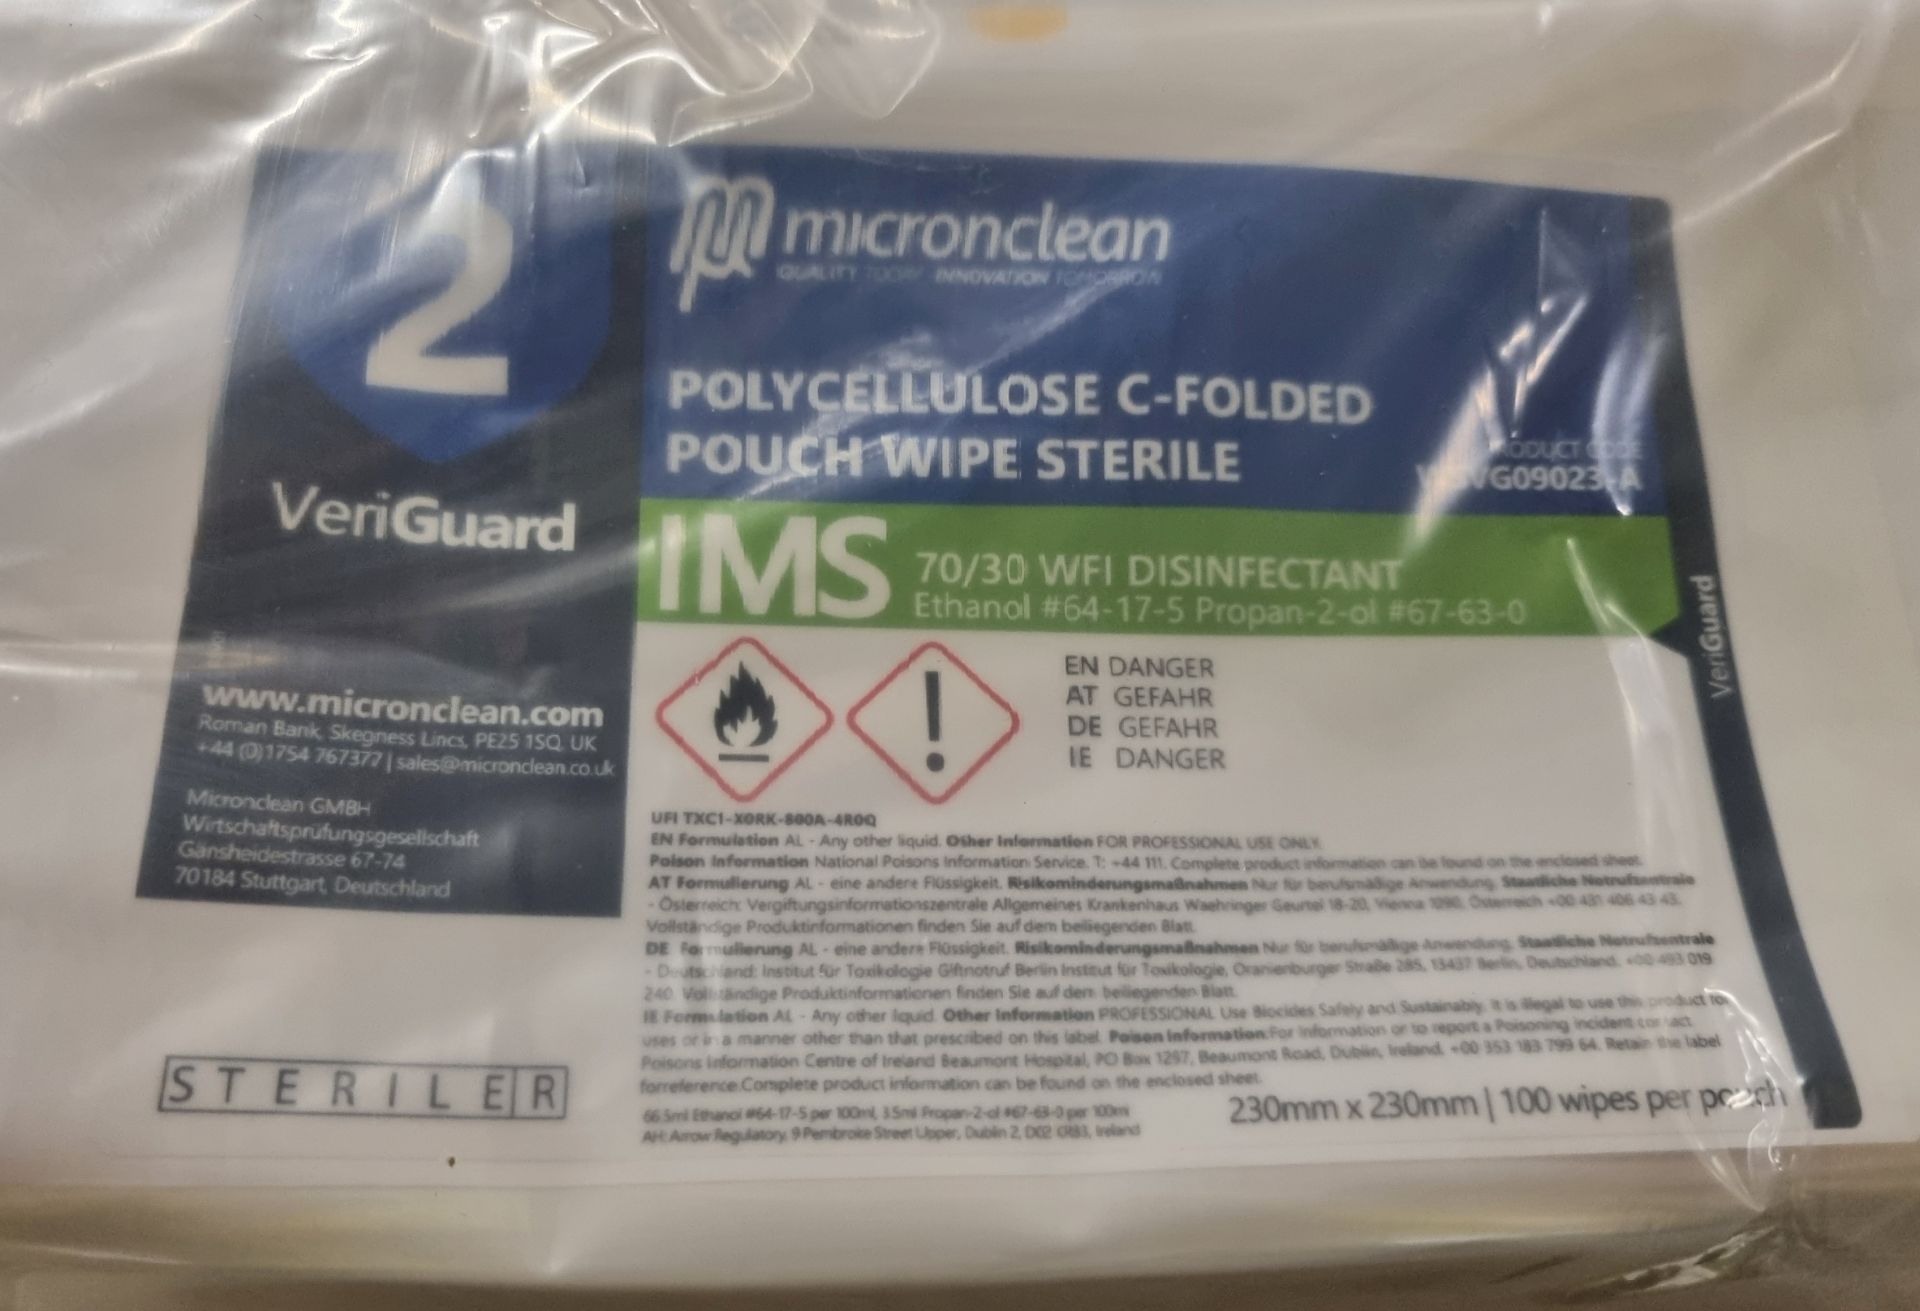 33x boxes of Micronclean Veriguard Polycellulose C-folded pouch wipe sterile - 230mm x 230mm